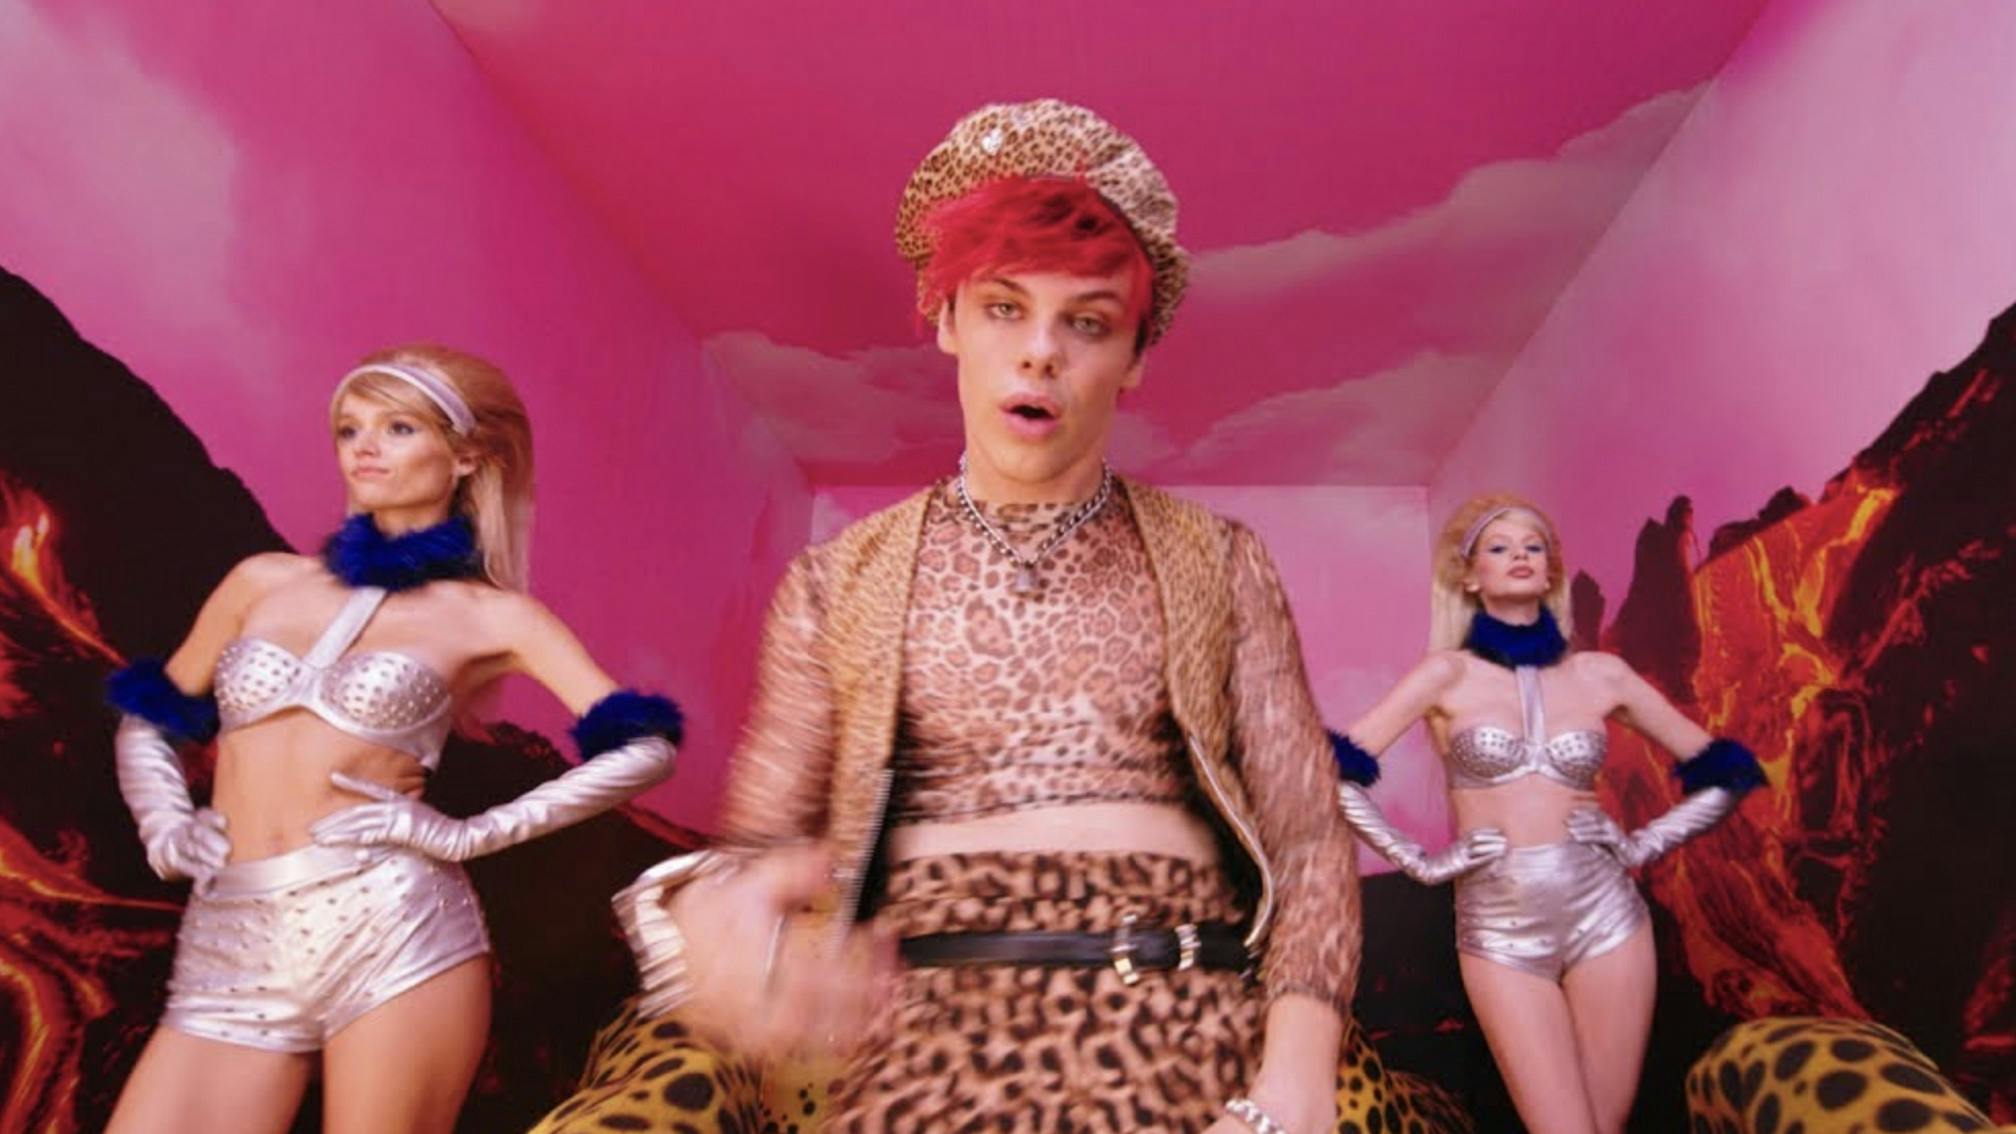 Watch YUNGBLUD's New Video for Cotton Candy